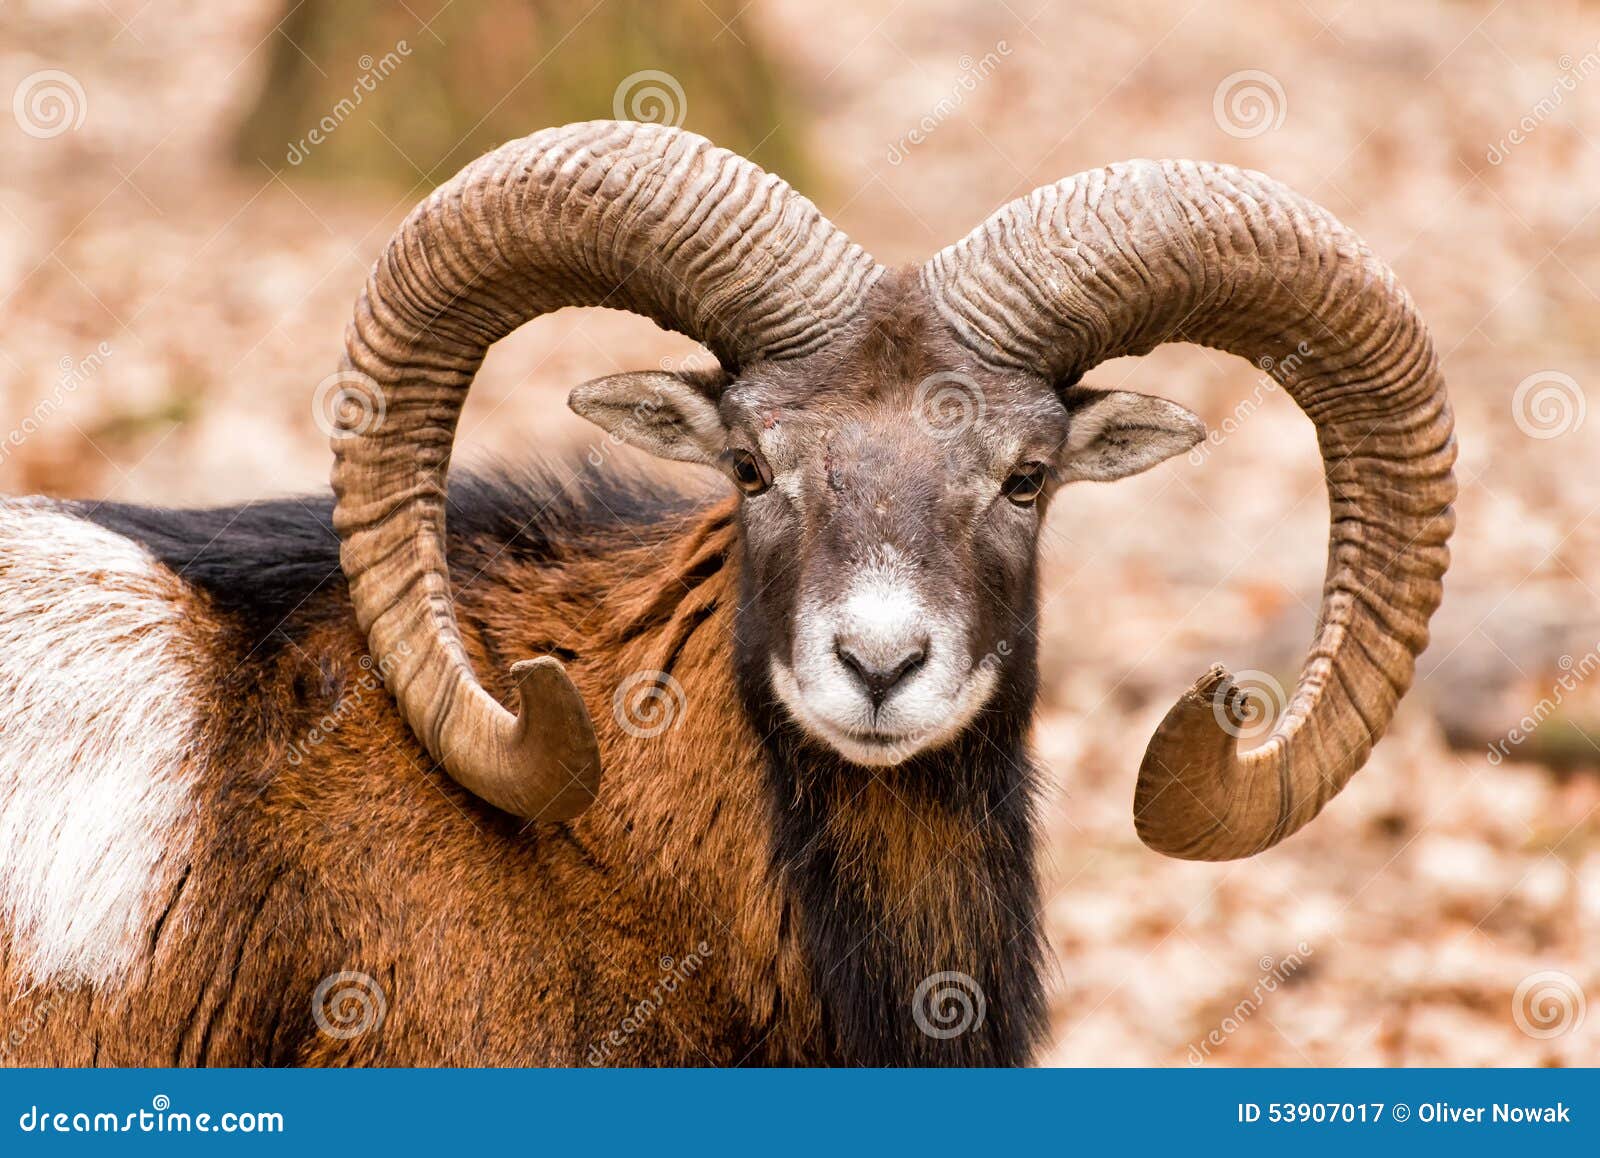 ram with big horns in the forest